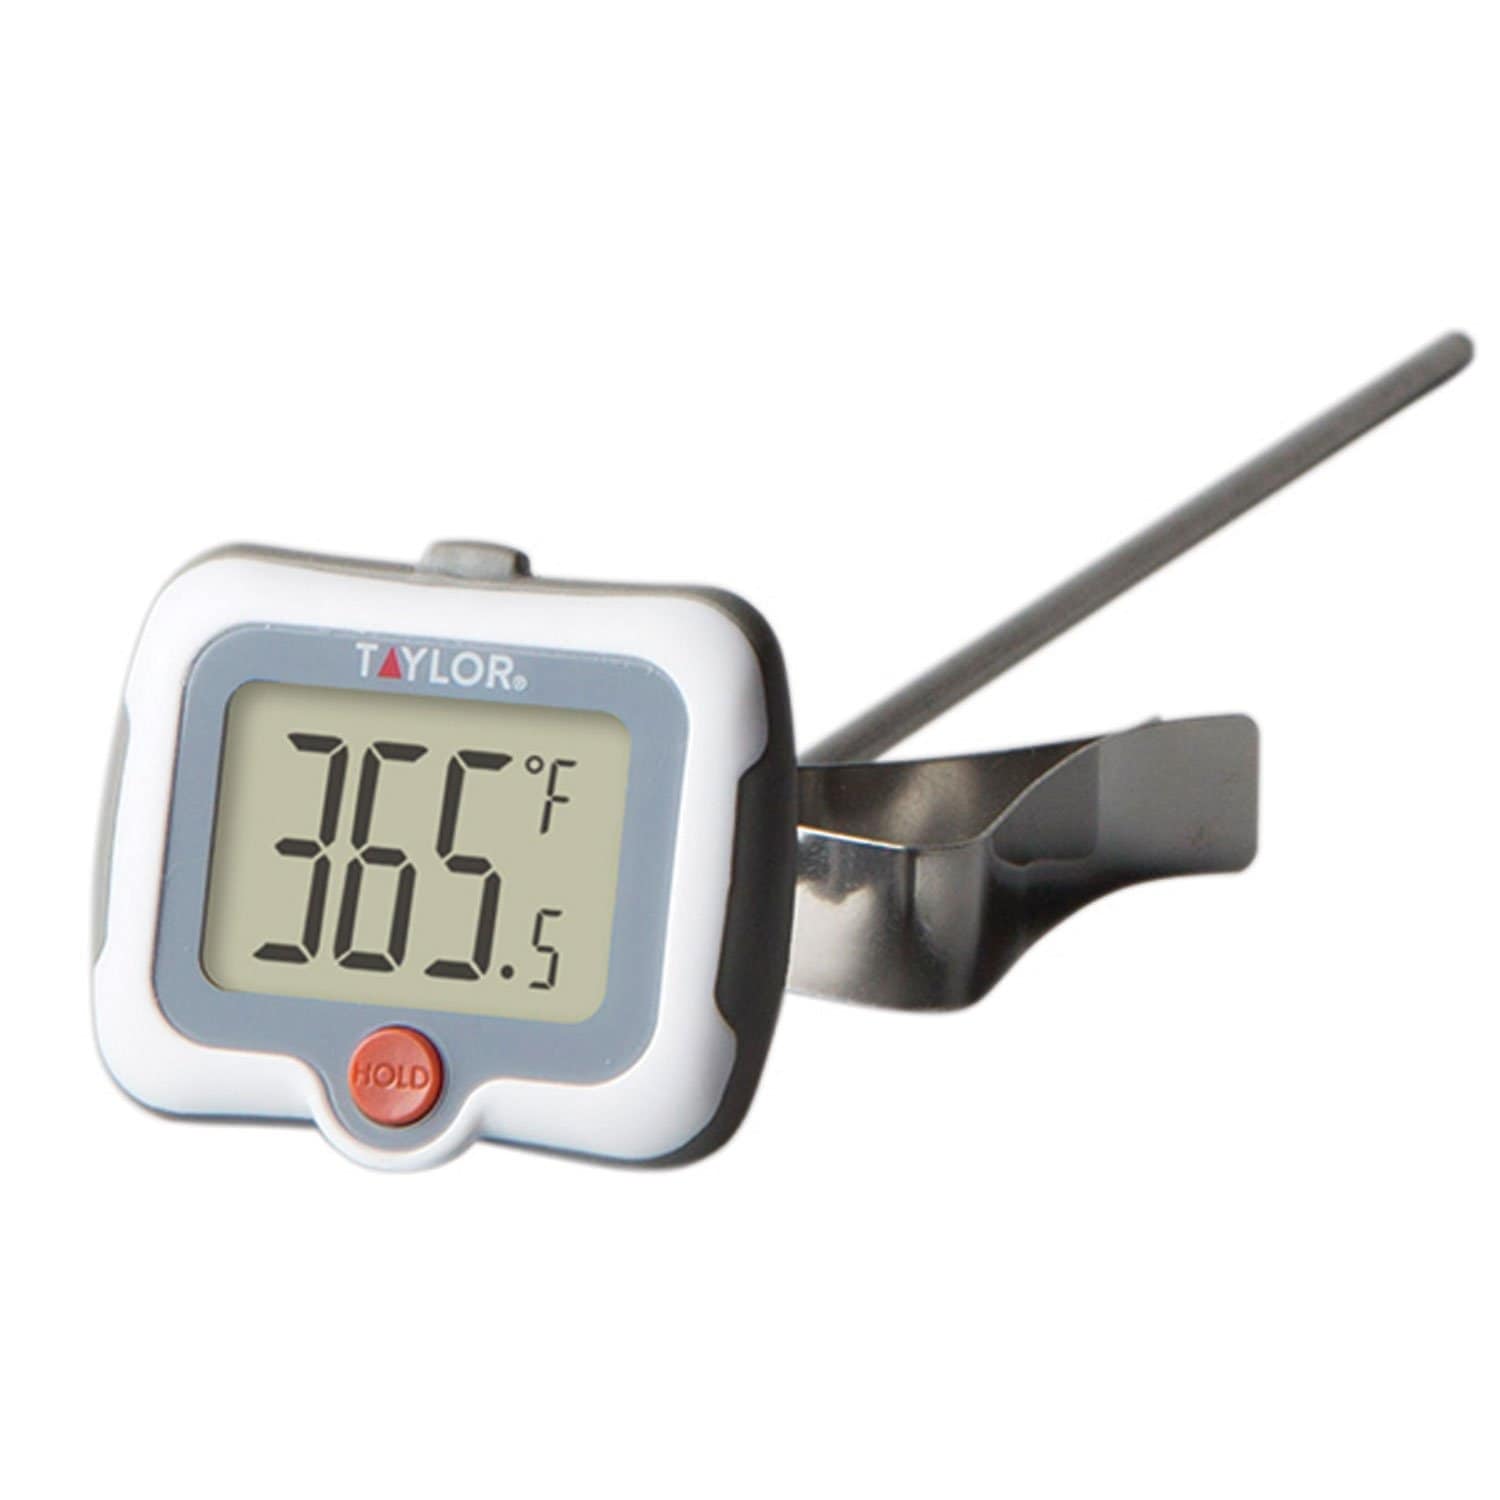 Taylor Candy and Deep Fry Thermometer with Adjustable Pan Clip 